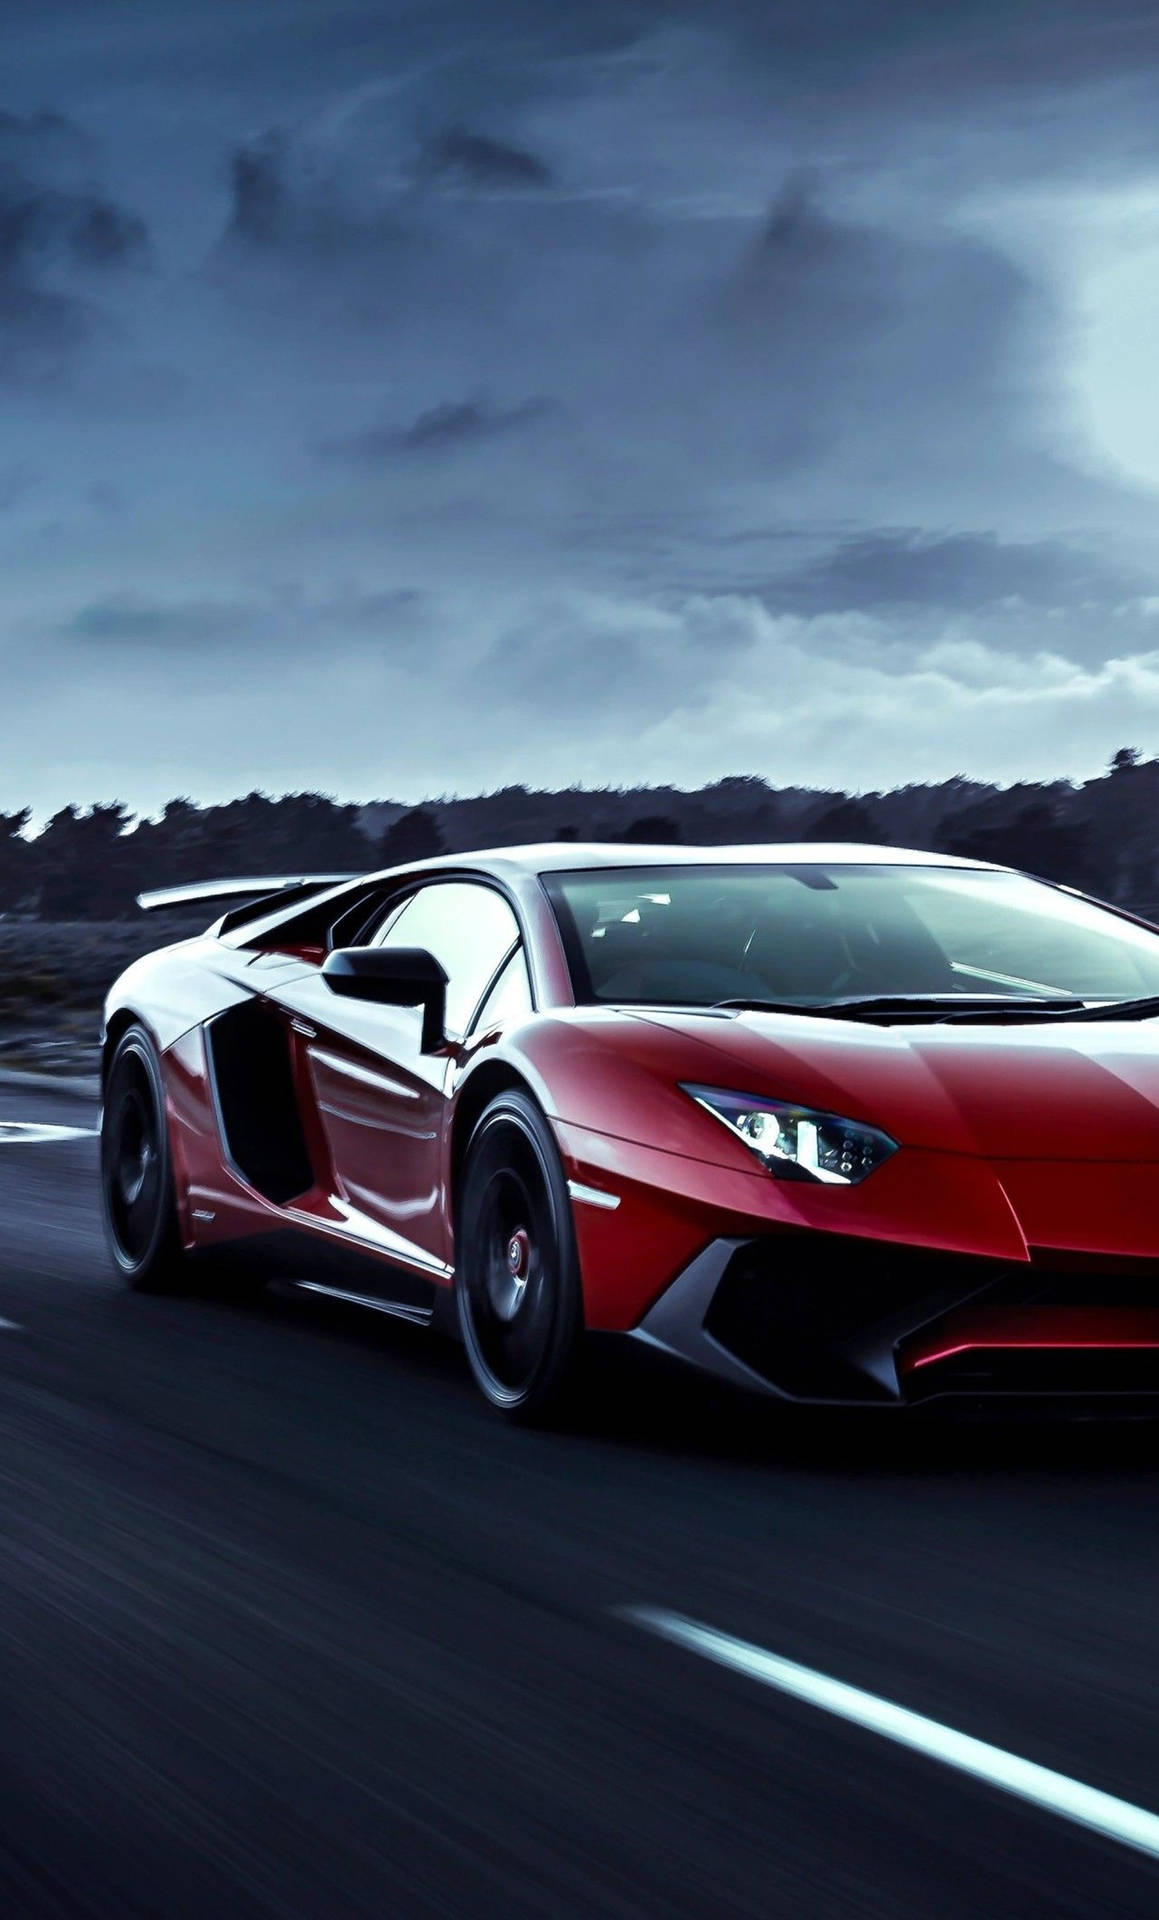 Embrace the Luxurious Lifestyle with this 4K Lamborghini iPhone Wallpaper